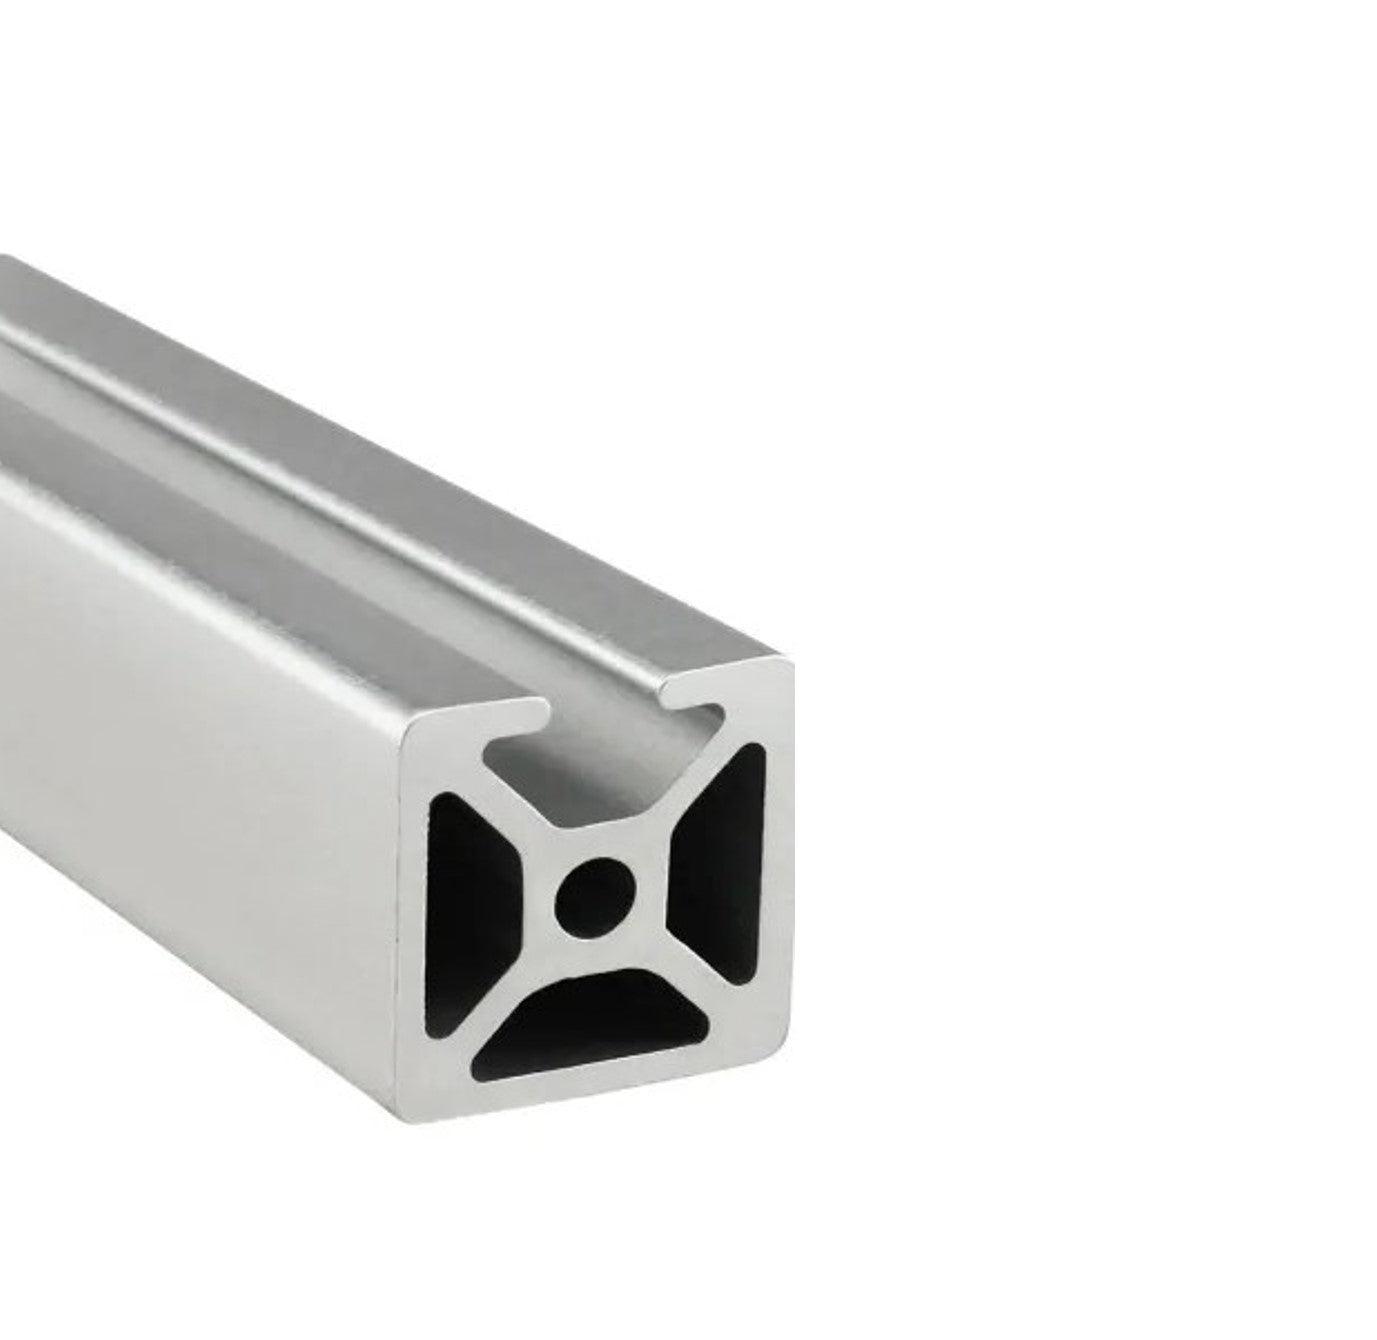 1" x 1" Smooth Mono T-Slotted Aluminum Extrusion - 1ft Bar - Forces Inc